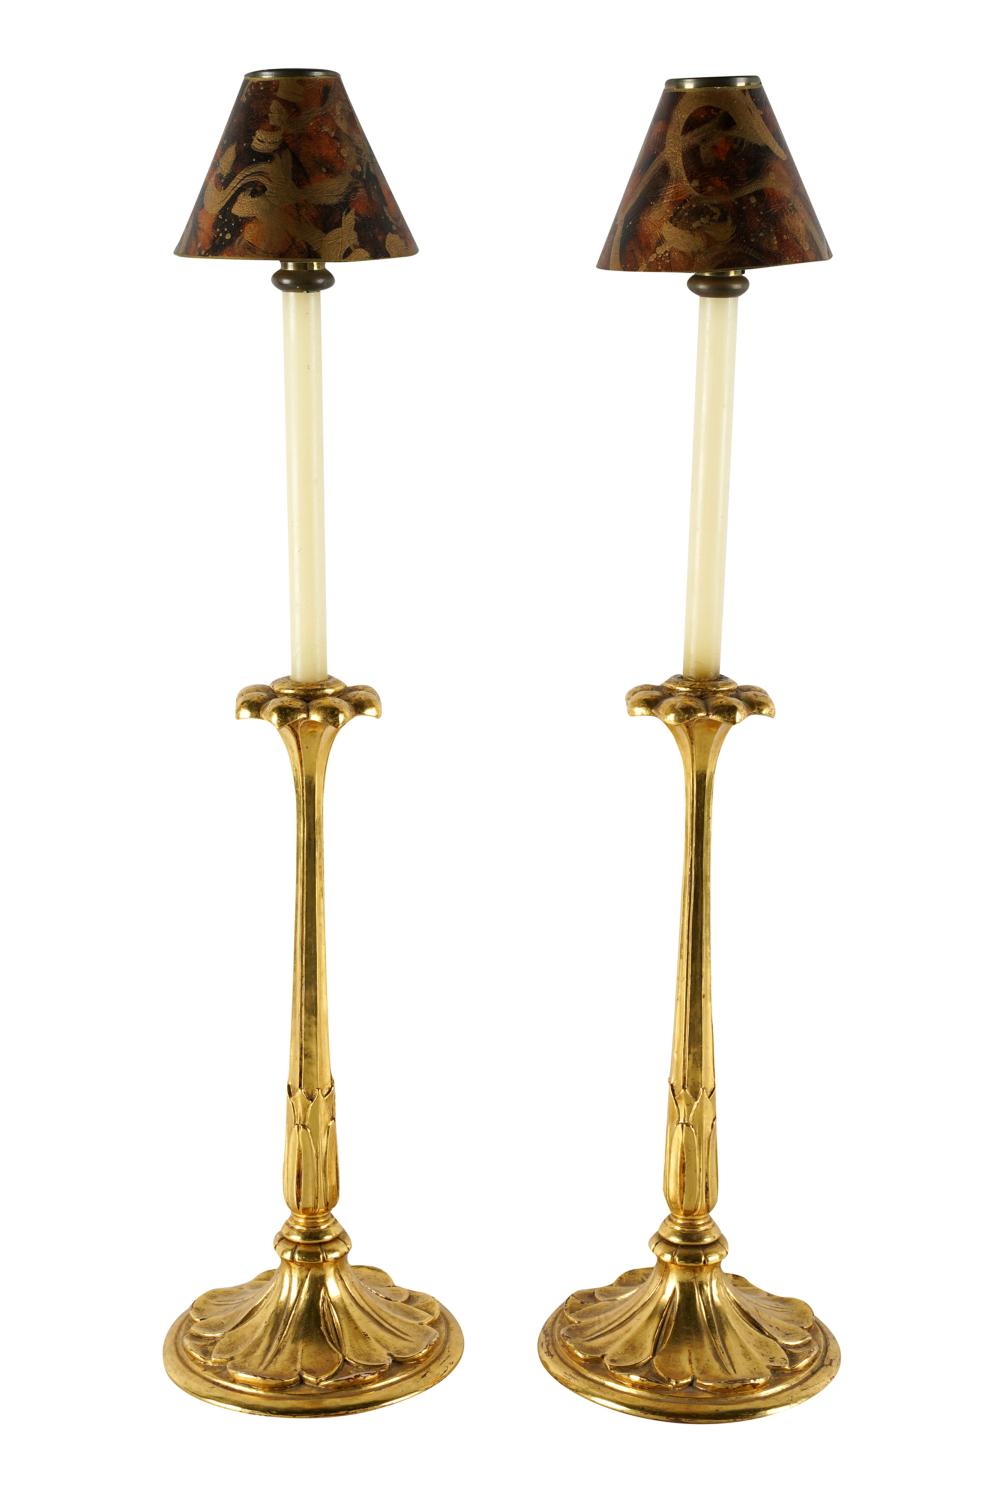 PAIR OF CARVED GILTWOOD CANDLE